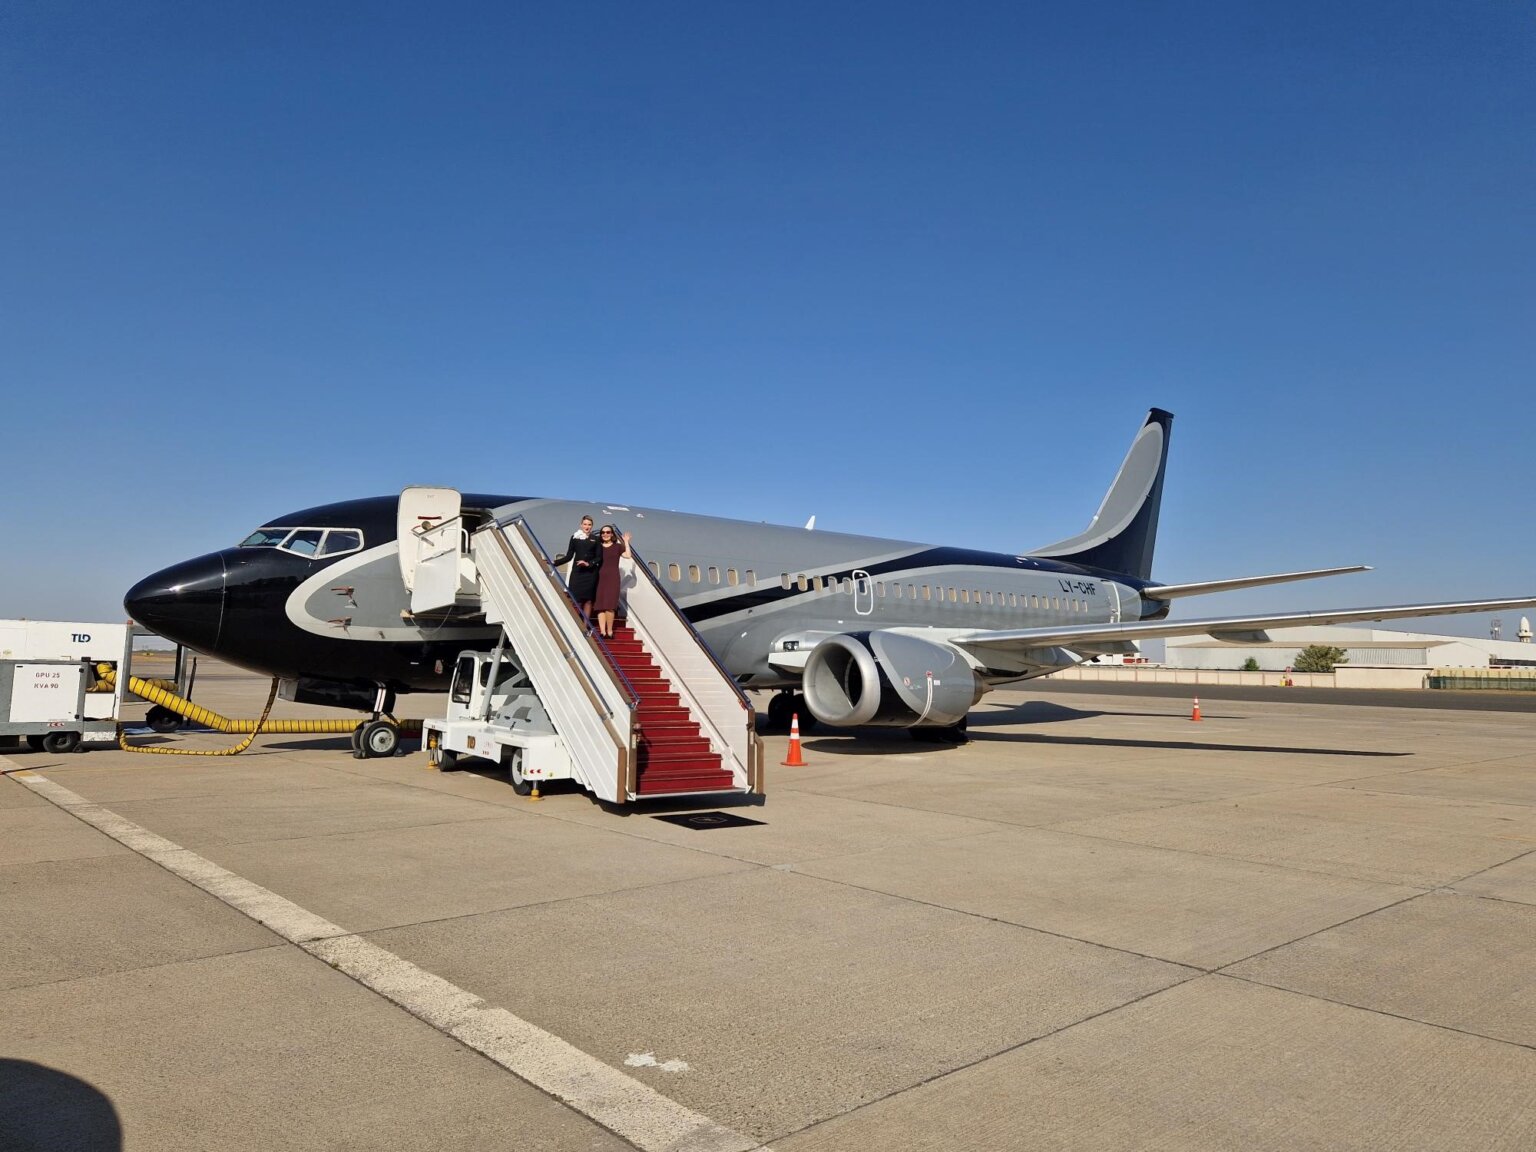 KlasJet Expands in Middle East Market, will Operate 68-Seat Aircraft from Dubai